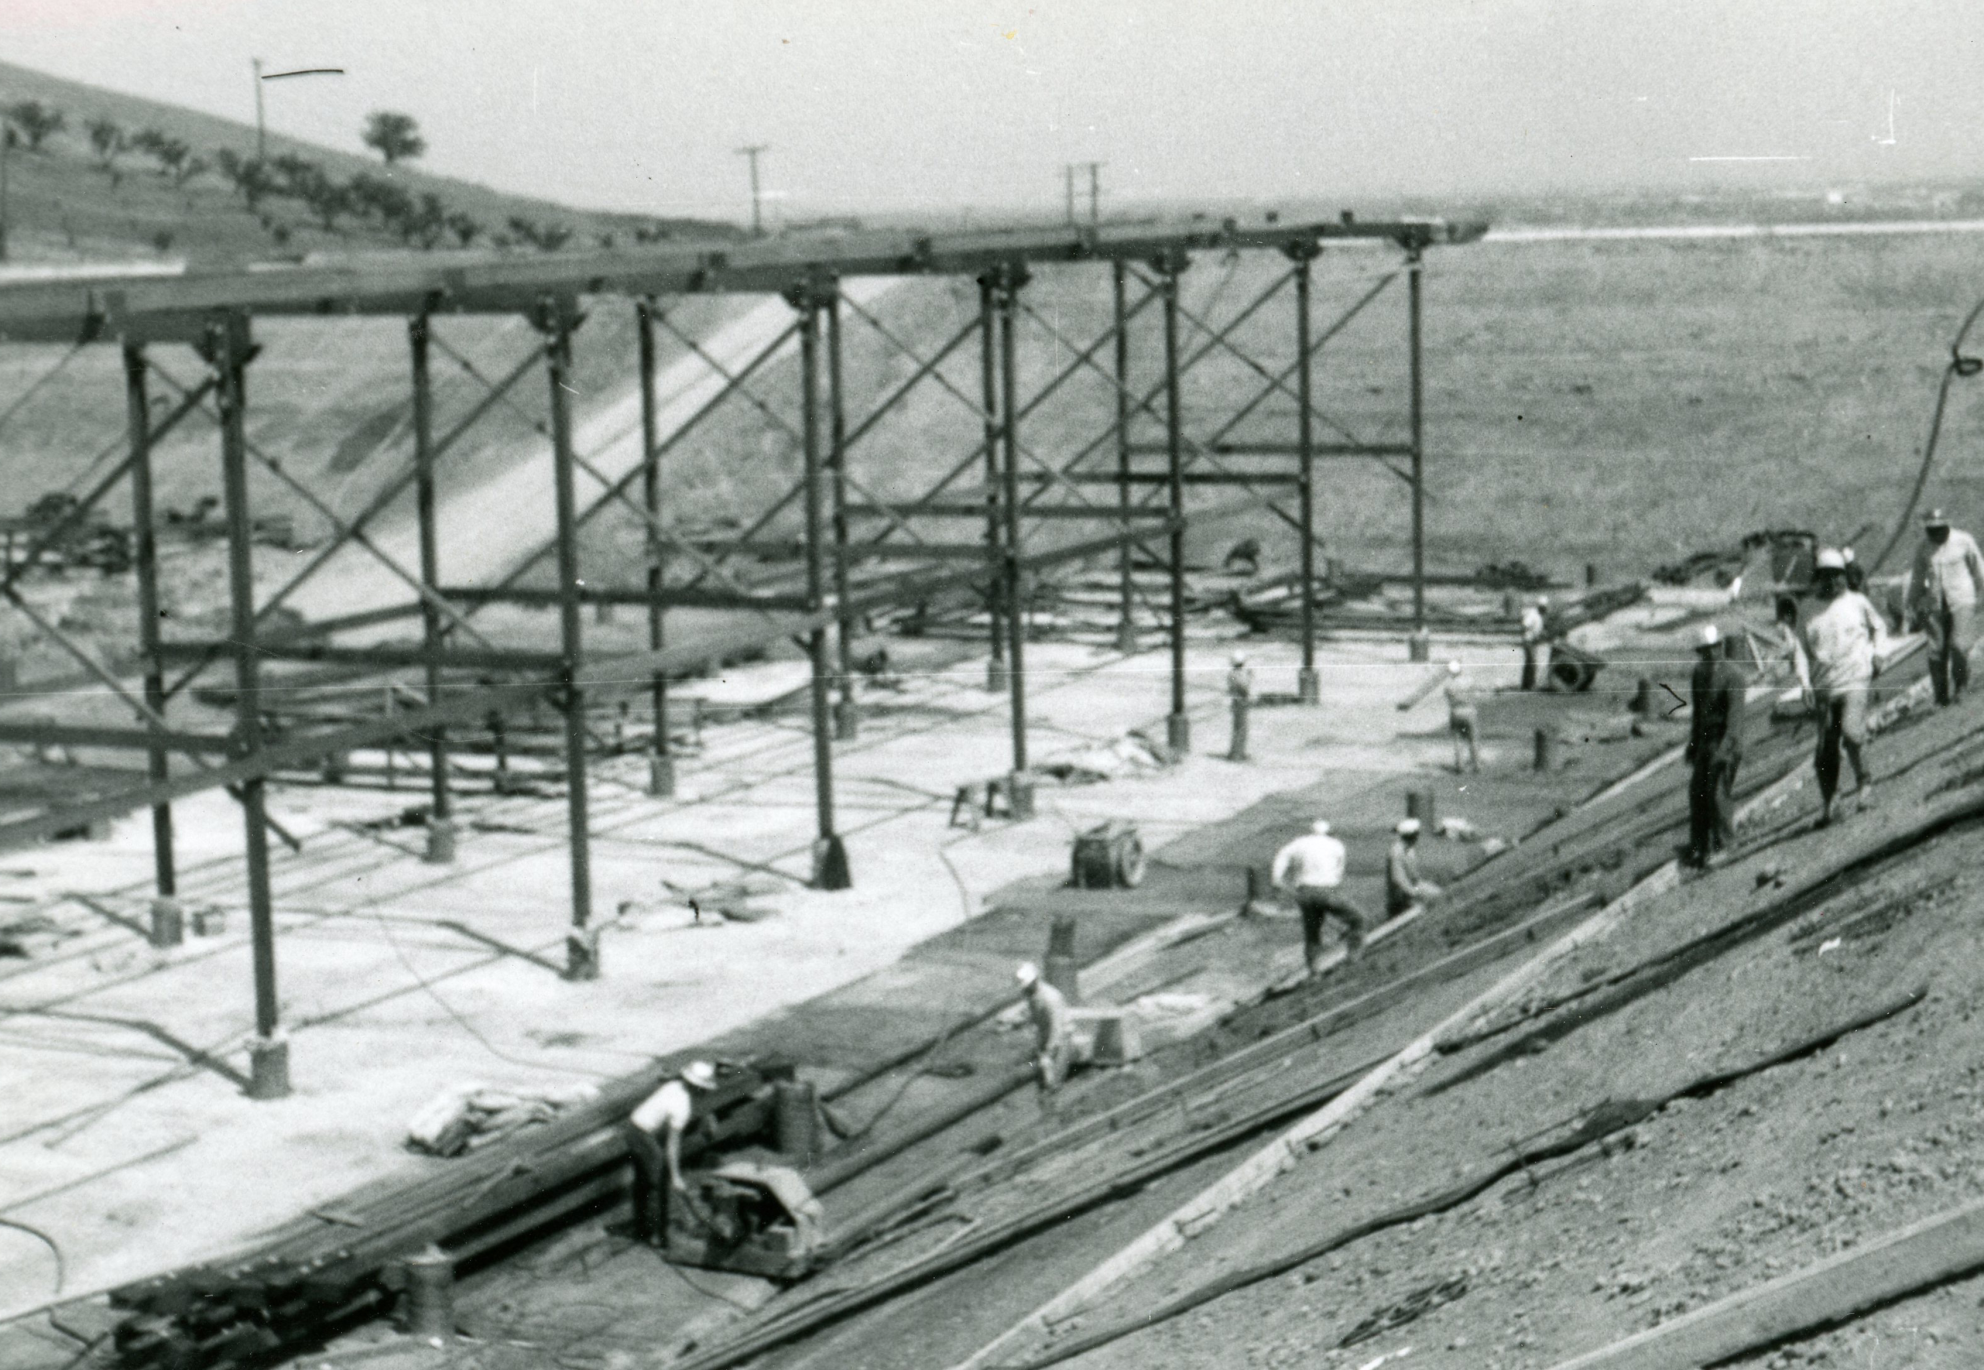 Columbine Historical Image 5 - black and white photo of workers constructing